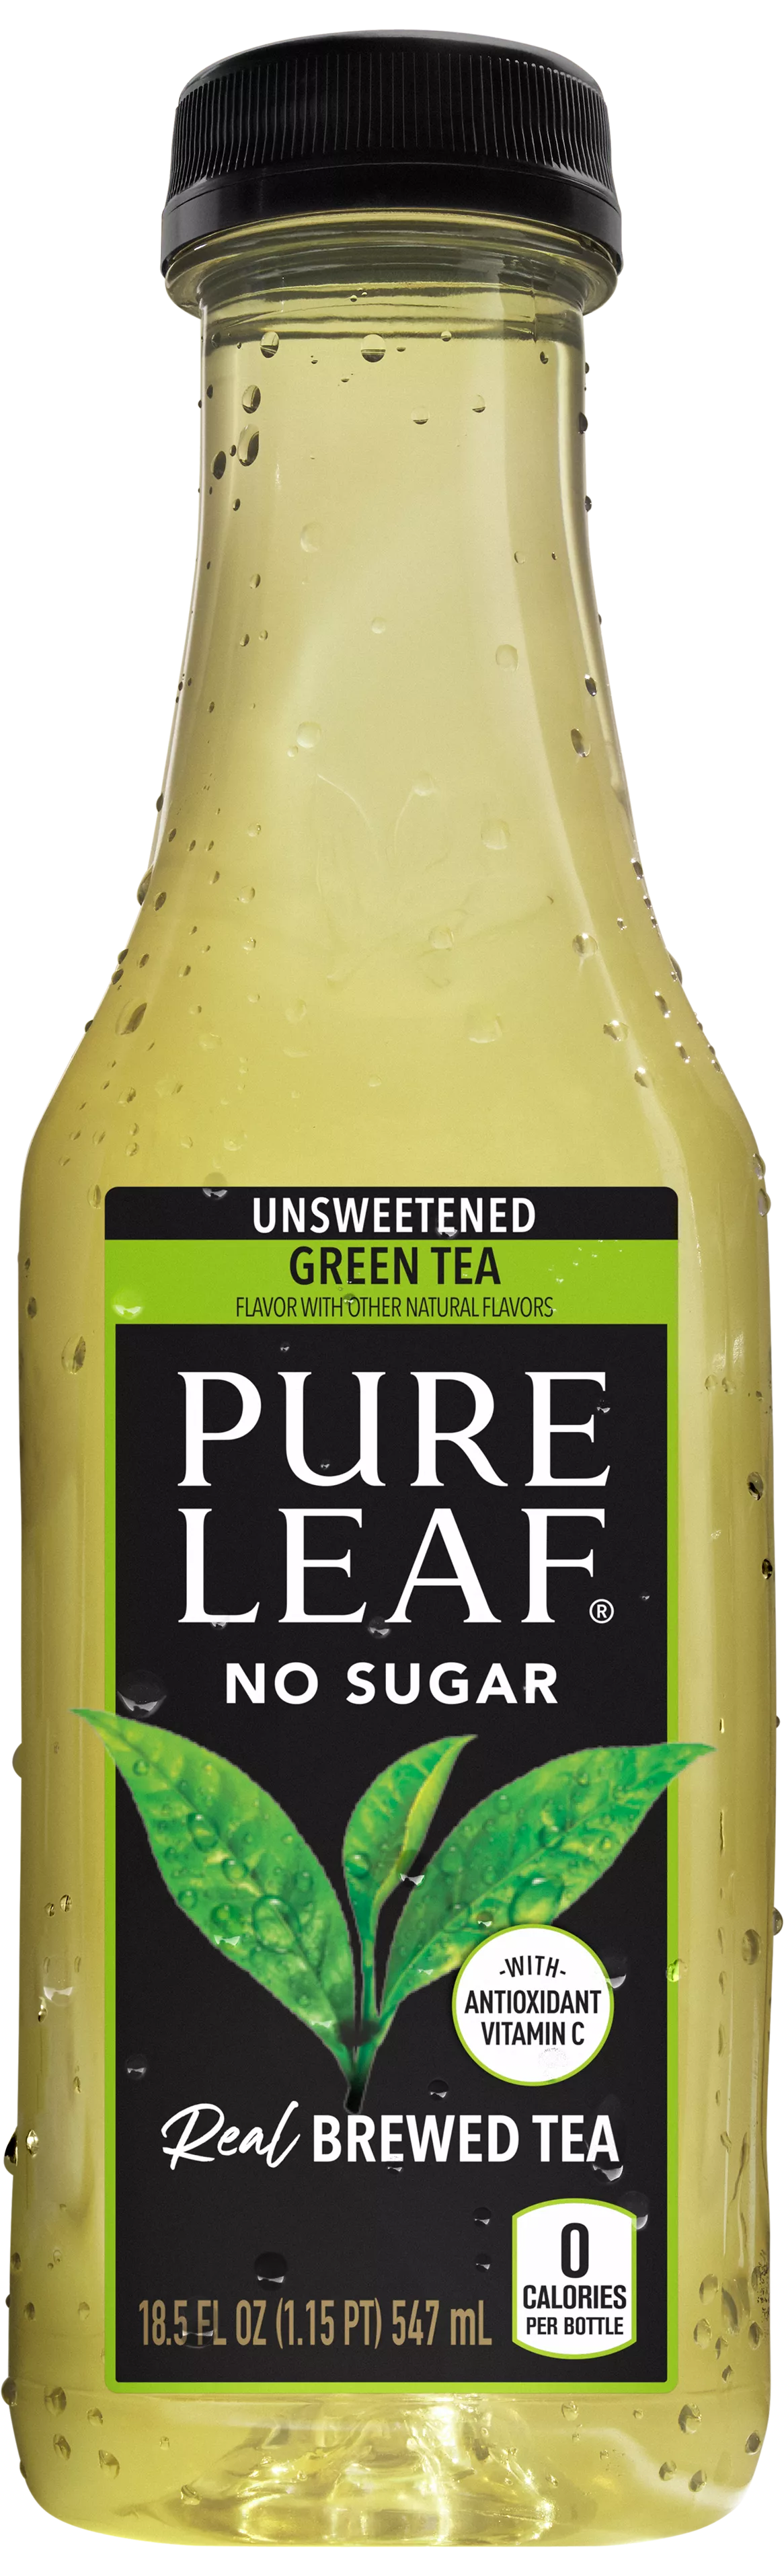 I was wondering why Pure Leaf Tea tasted so different. There's no